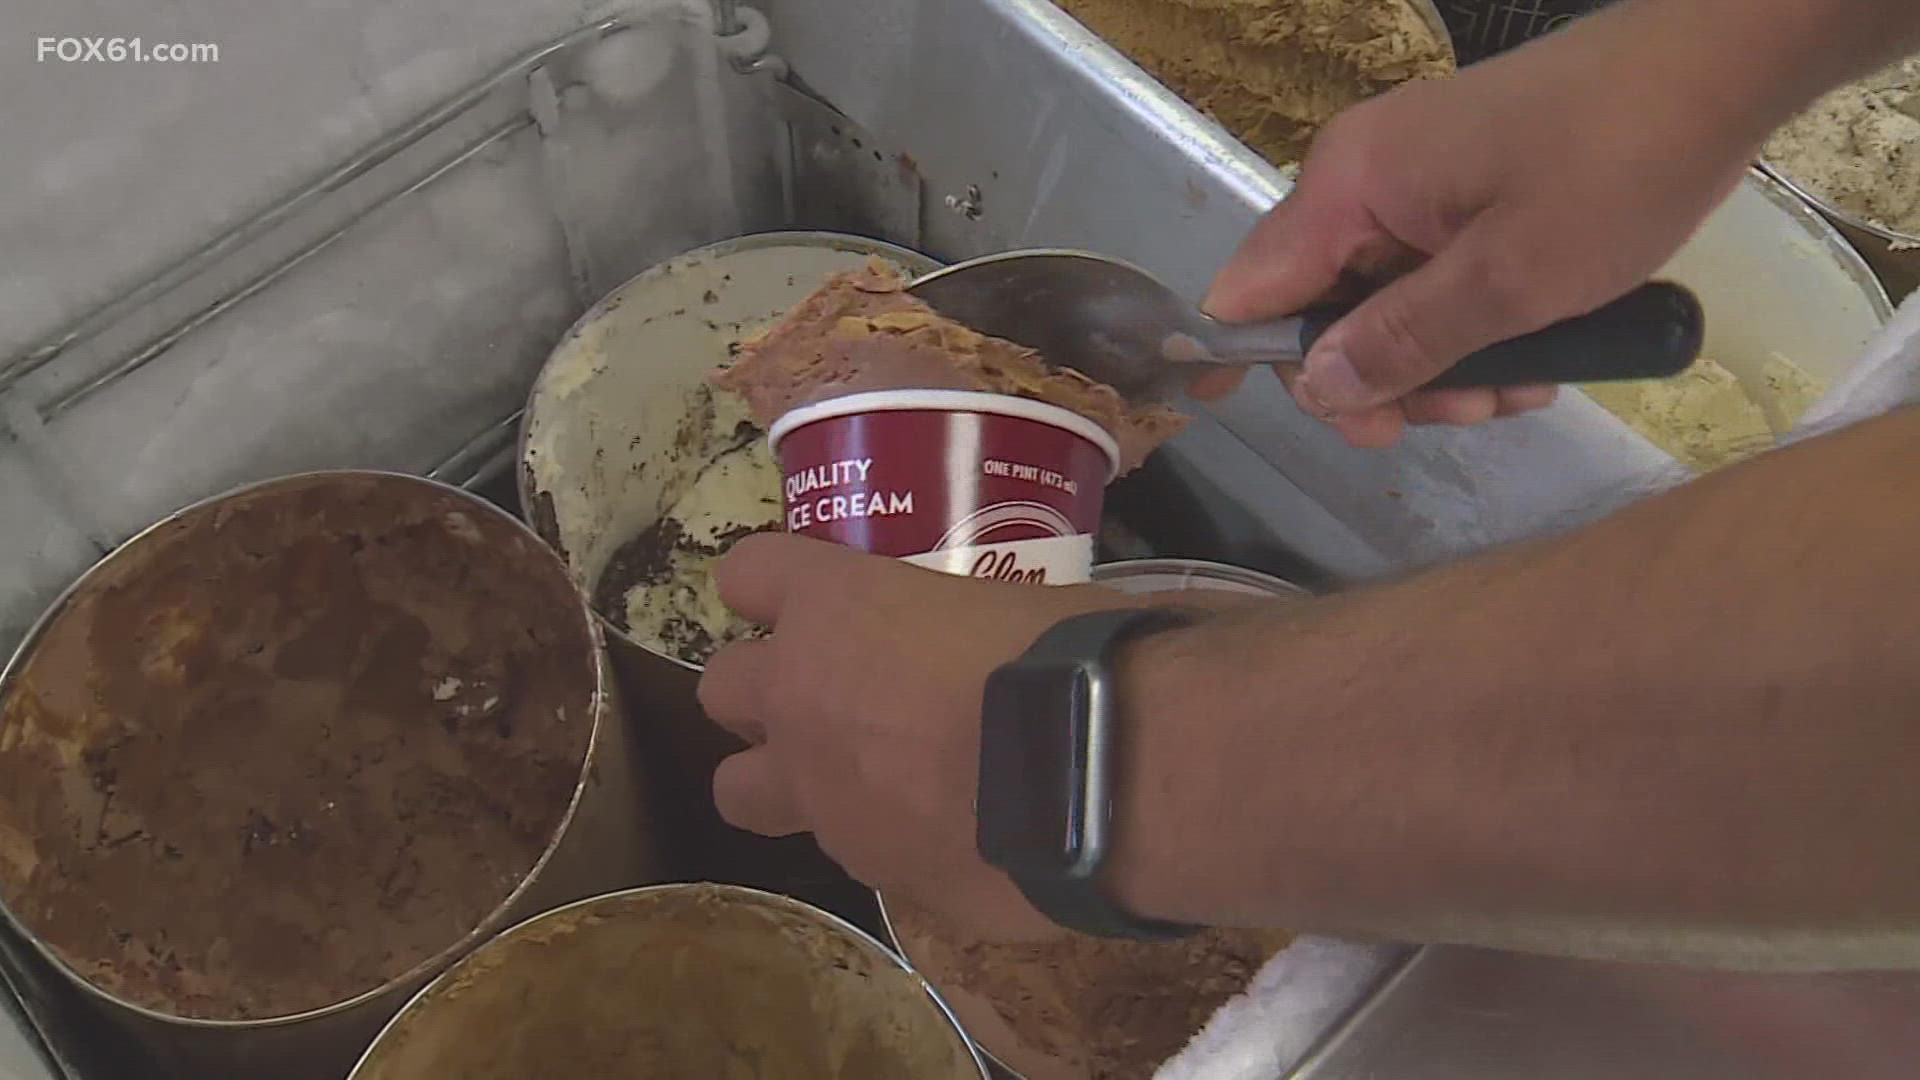 Dedicated customers began to come into American Creamery before 11 a.m. Friday to help support Pints for Pakistan.